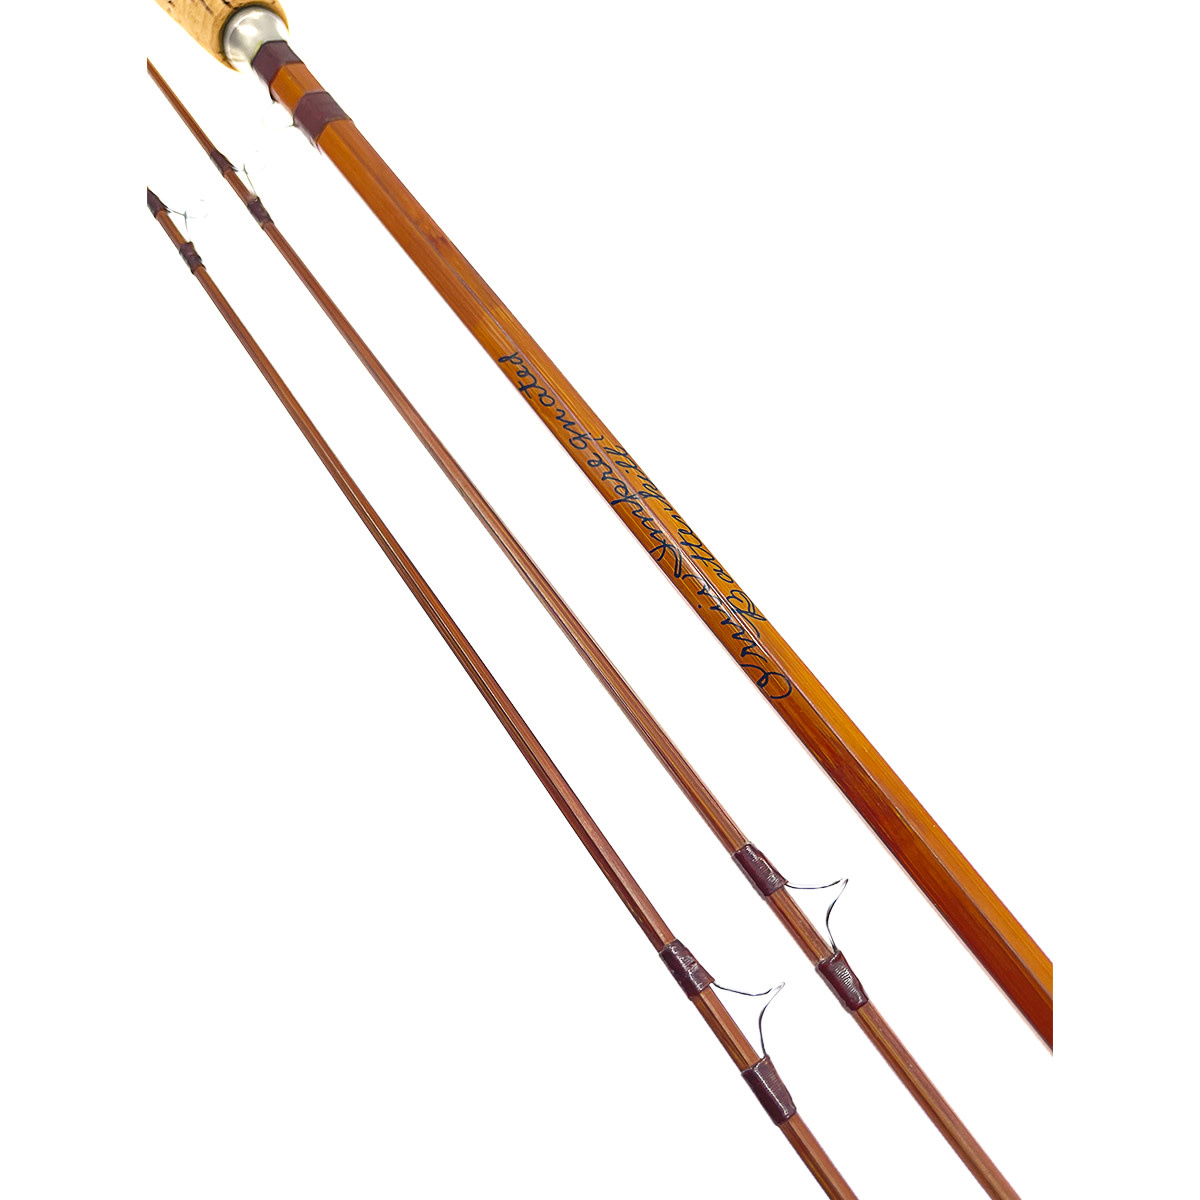 Orvis Battenkill Bamboo Fly Rod 7' - 6 weight, 2pc. - Impregnated - Urban  Angler